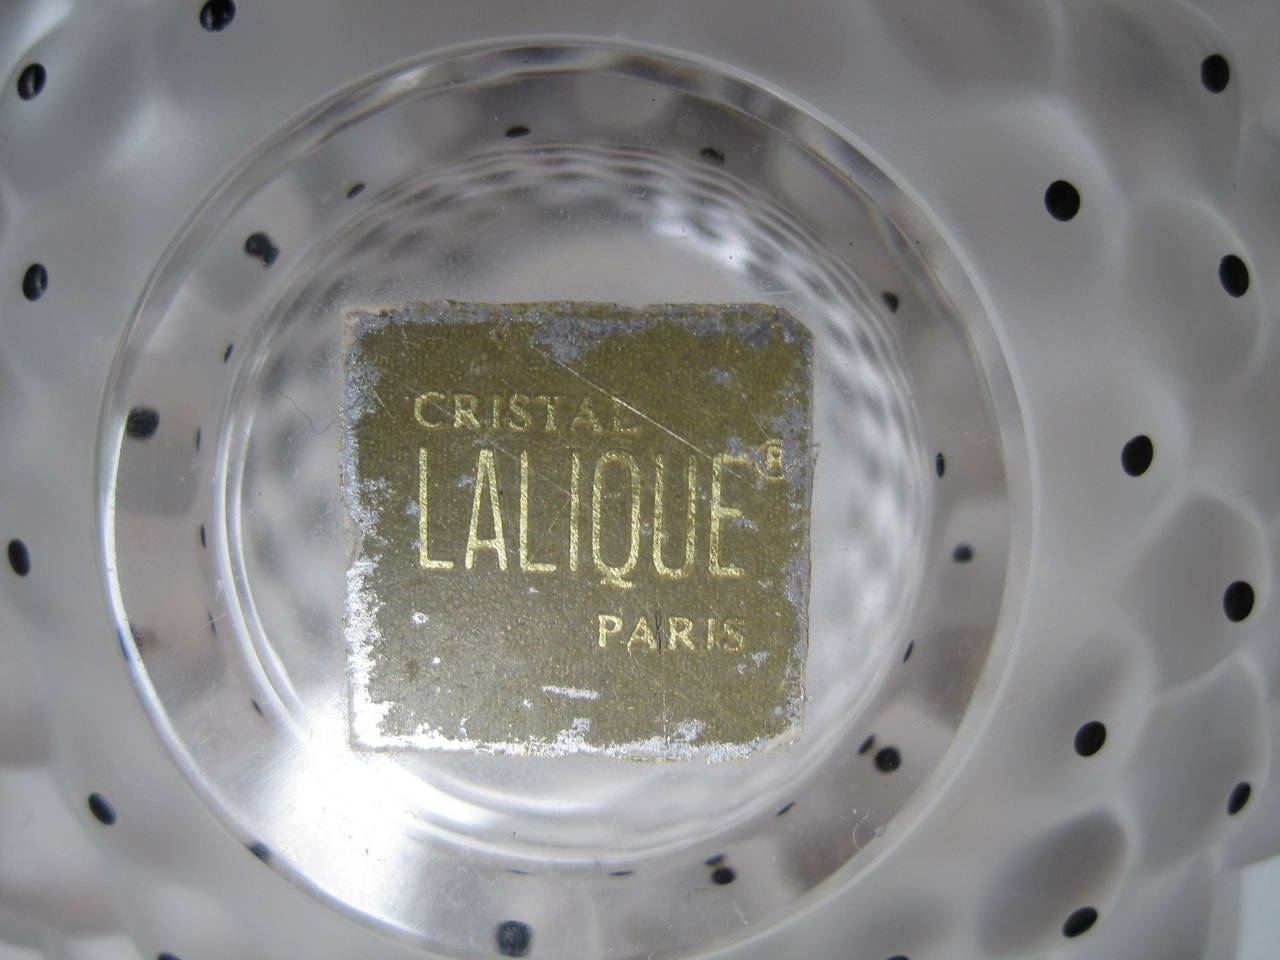 Lalique Cactus Perfume Bottle

Shipping within the United States and Canada is free.